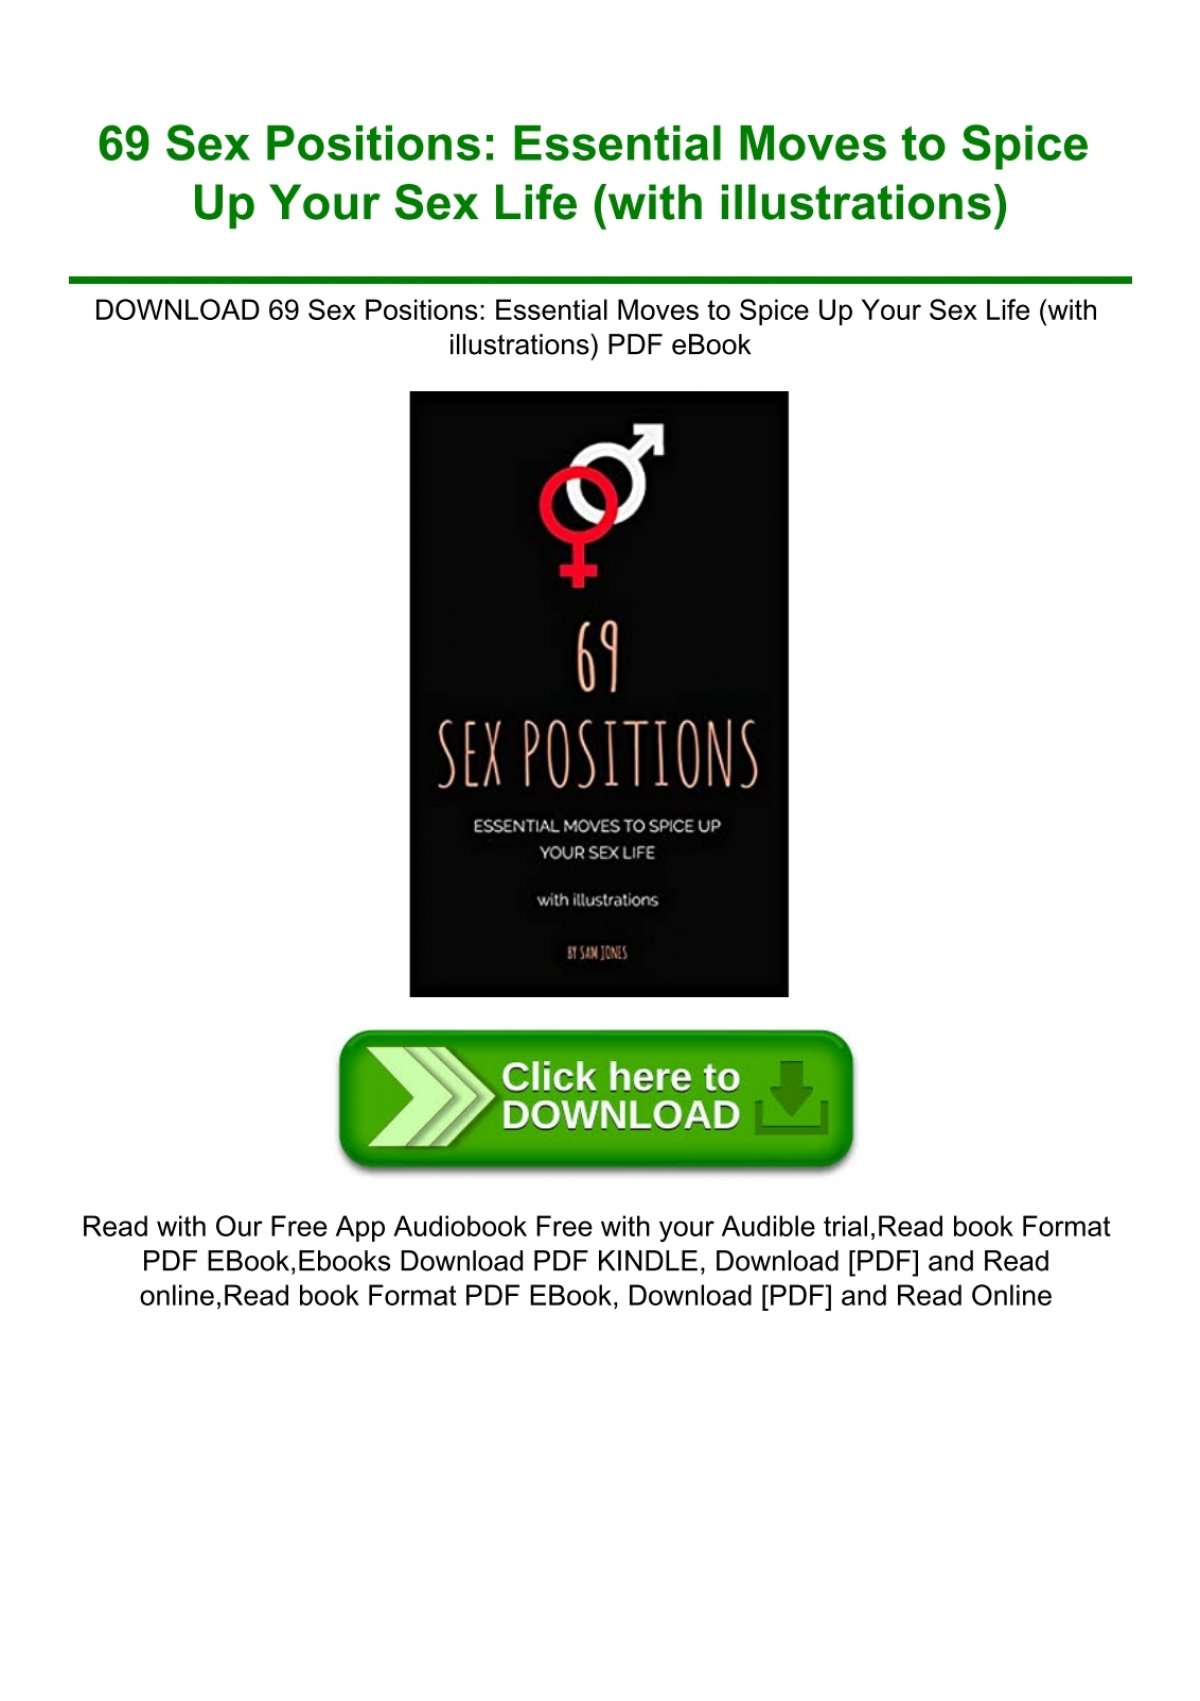 Download 69 Sex Positions Essential Moves To Spice Up Your Sex Life With Illustrations Pdf Ebook